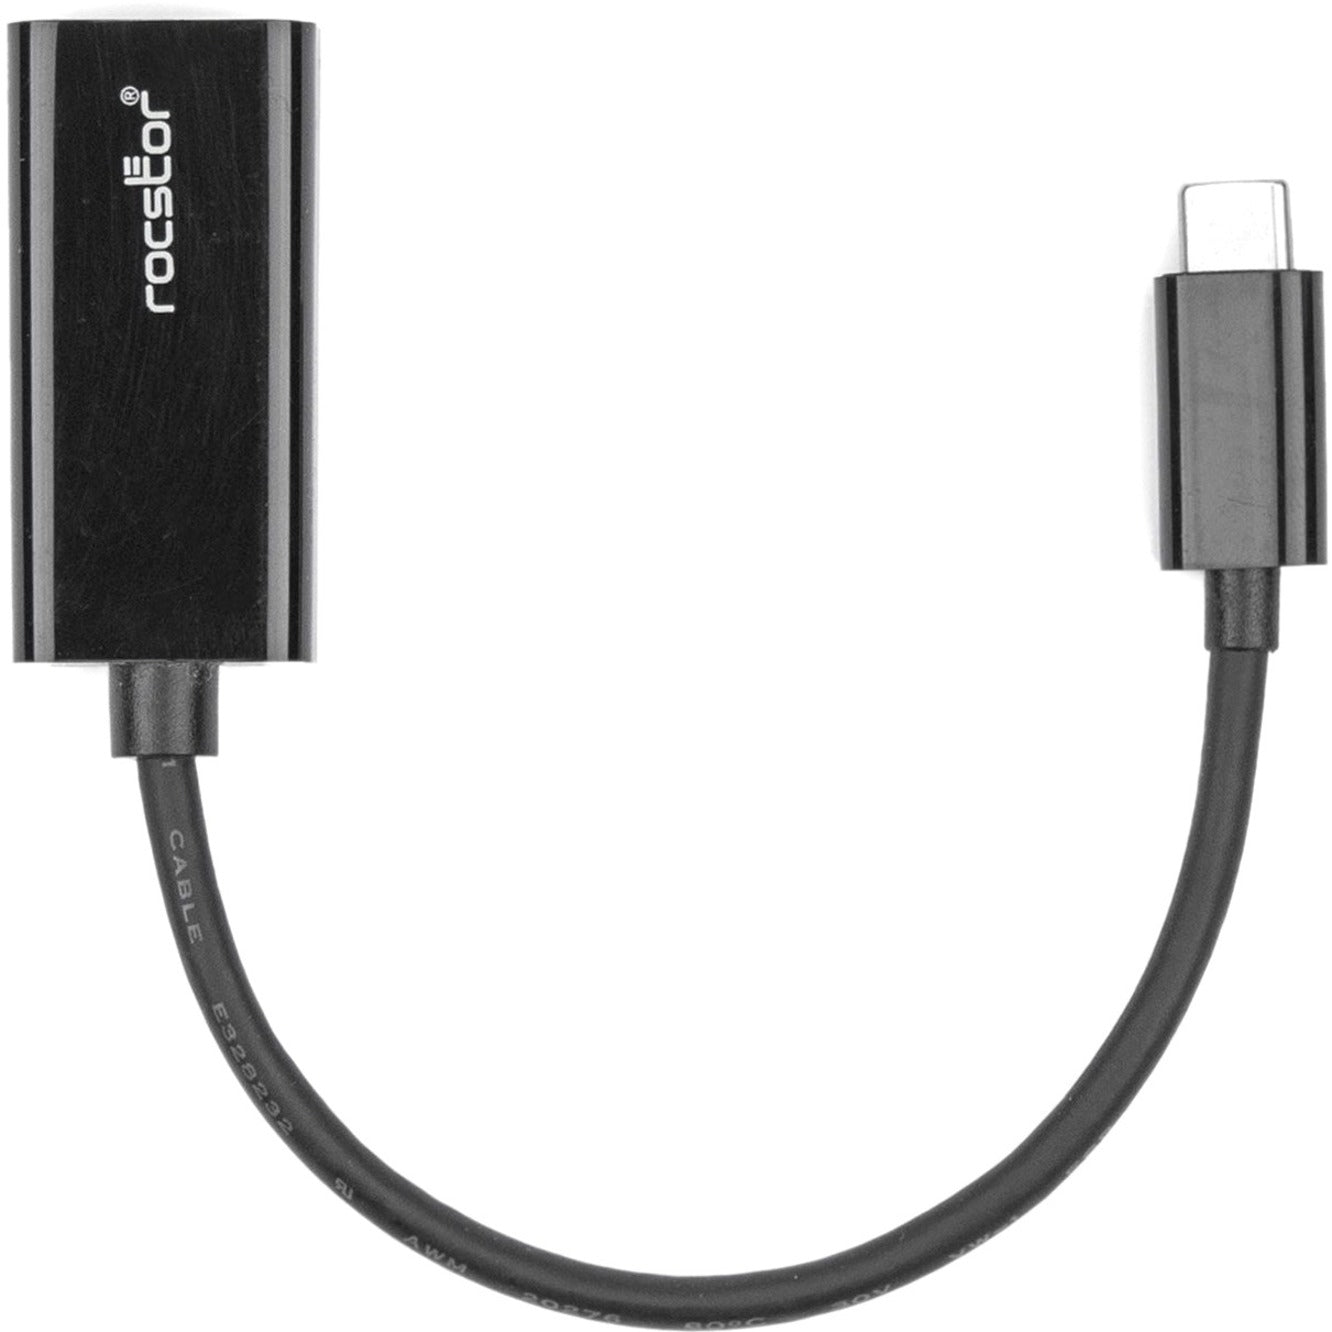 Rocstor Y10C131-B1 Premium USB-C to DP Adapter 6" Adapter Converter, Reversible, 1920 x 1200 Supported Resolution, Black